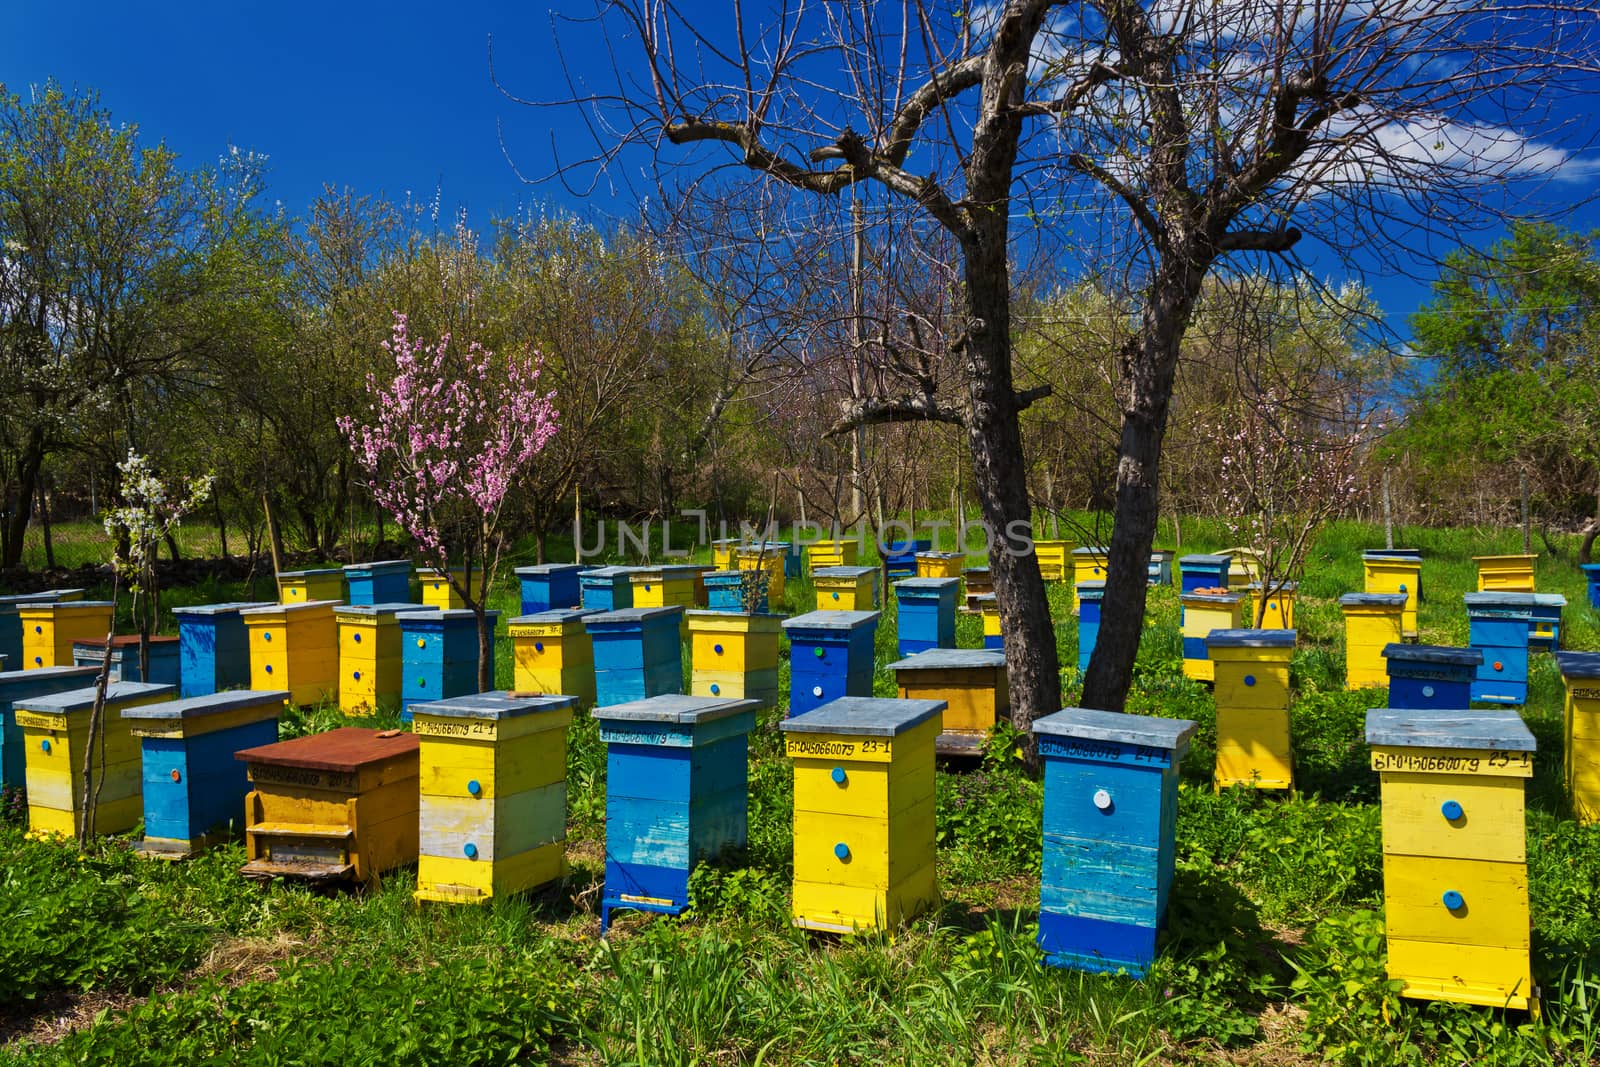 Blue and yellow beehives in garden.